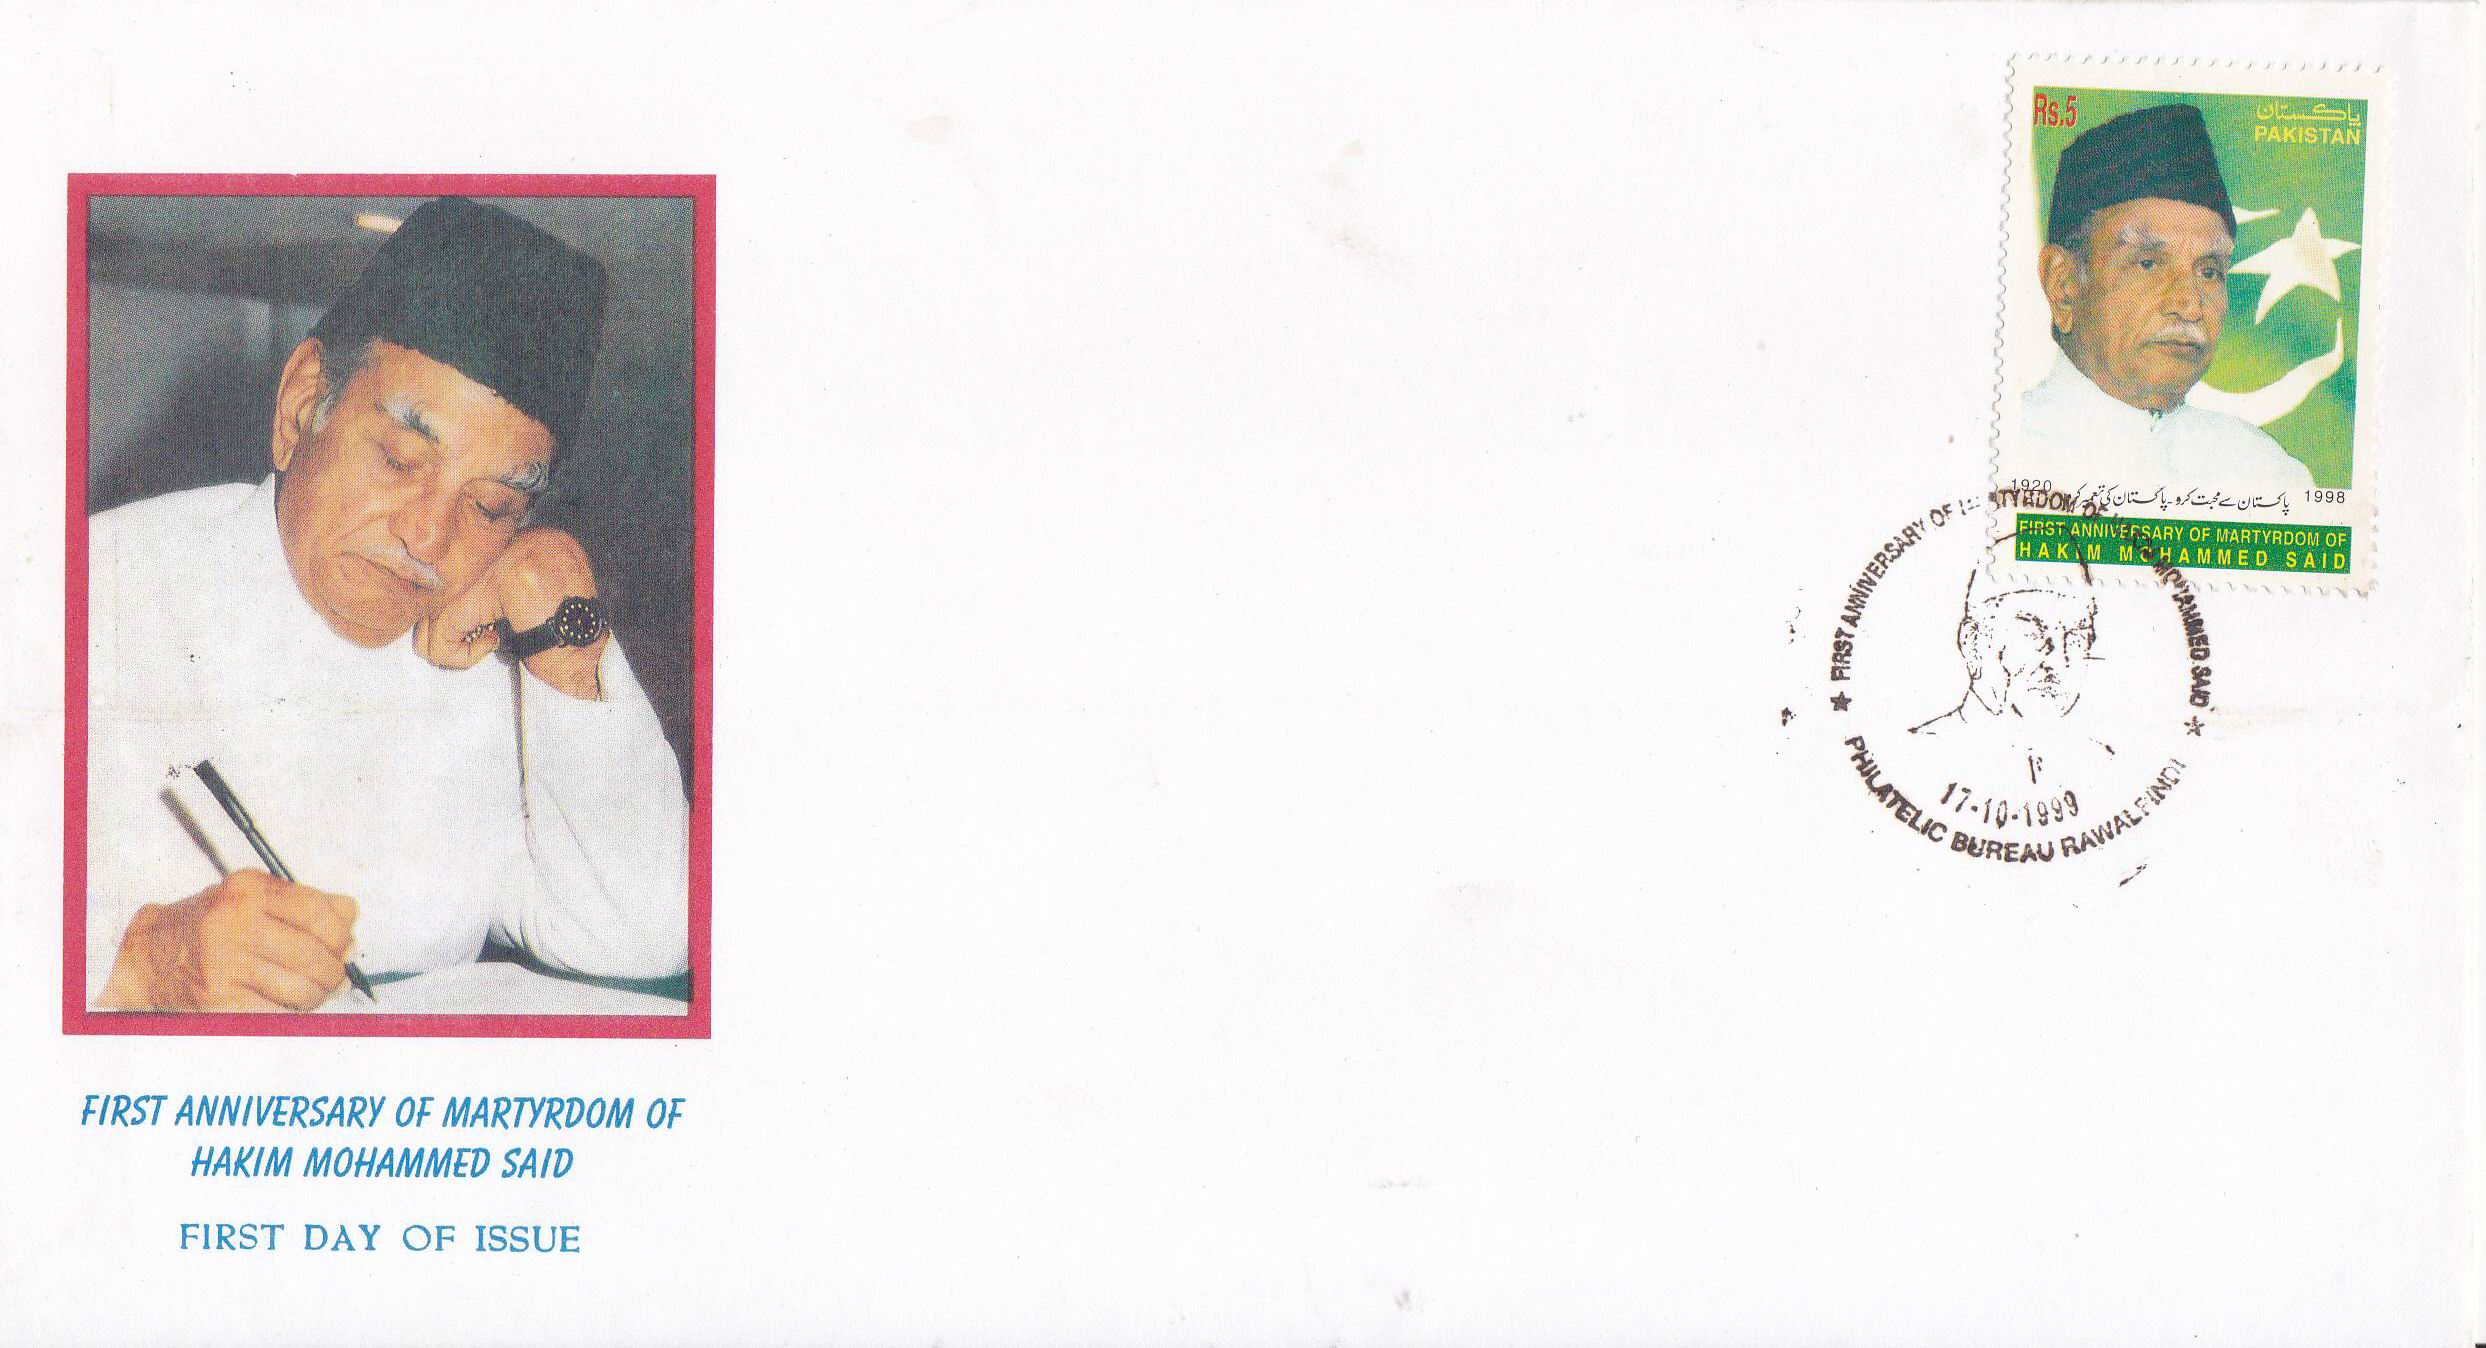 Pakistan Fdc 1999 Brochure & Stamp Hakim Mohammad Said - Click Image to Close